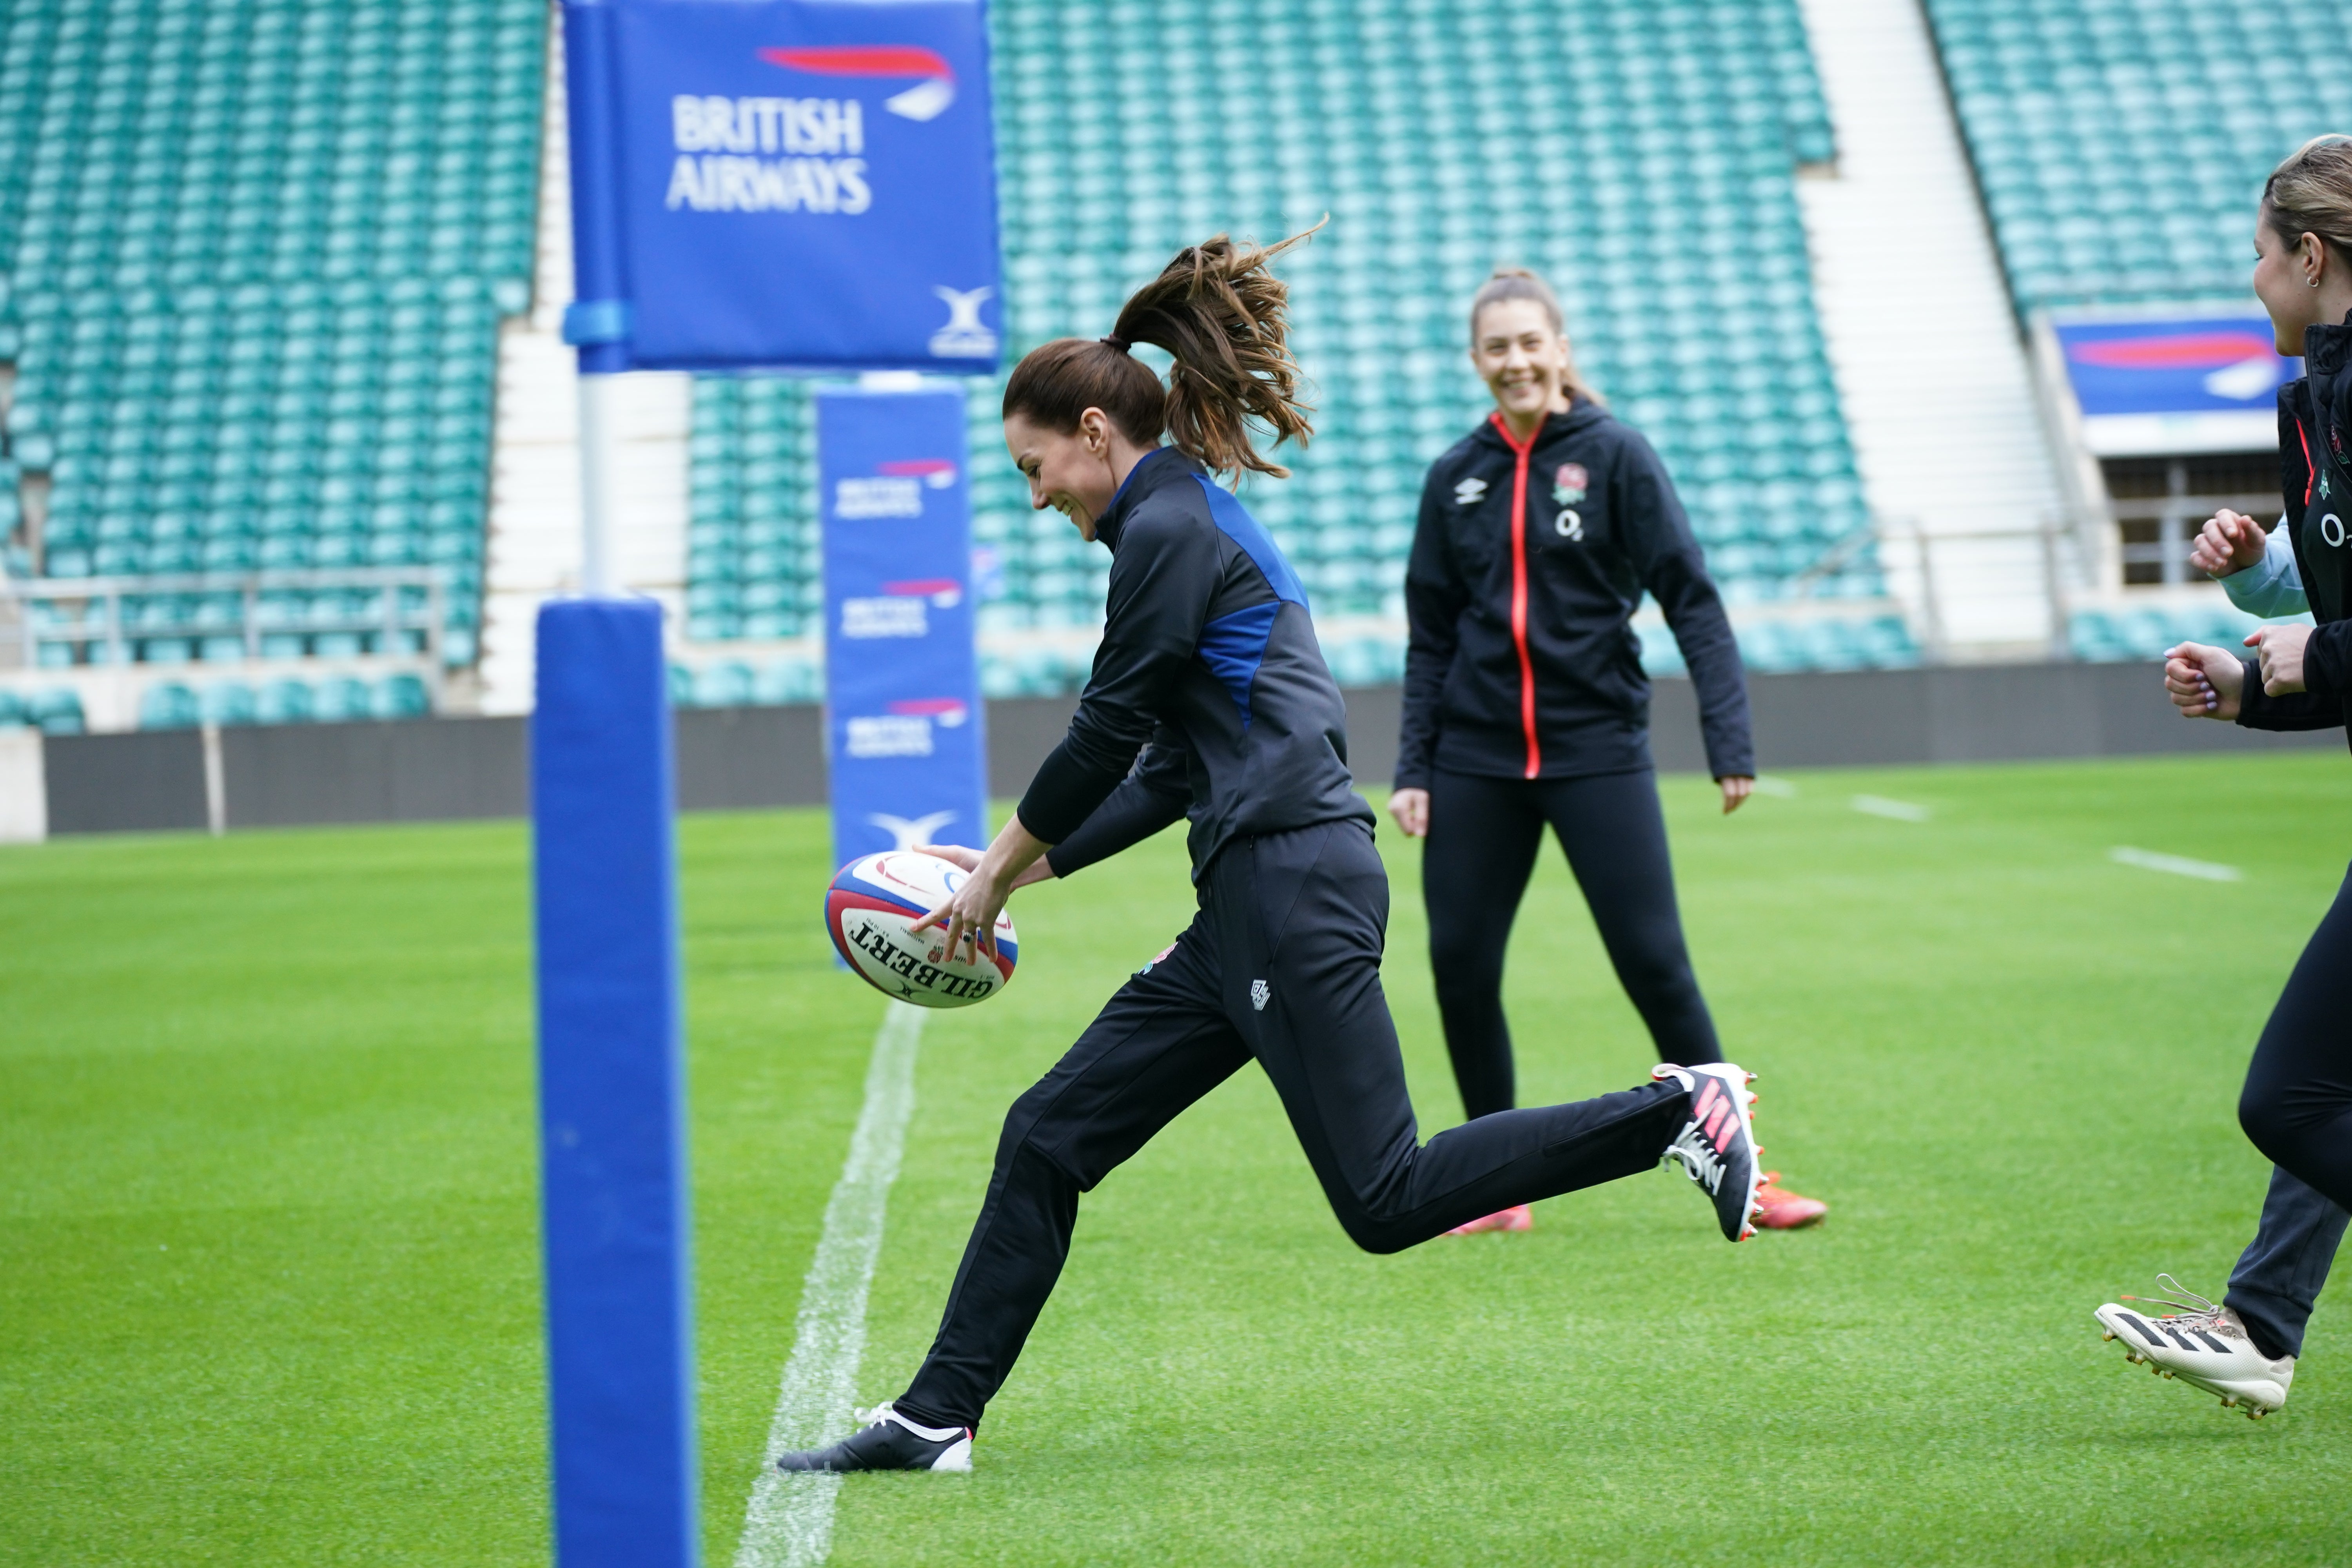 The Duchess of Cambridge joined in an England training session at Twickenham (Yui Mok/PA)